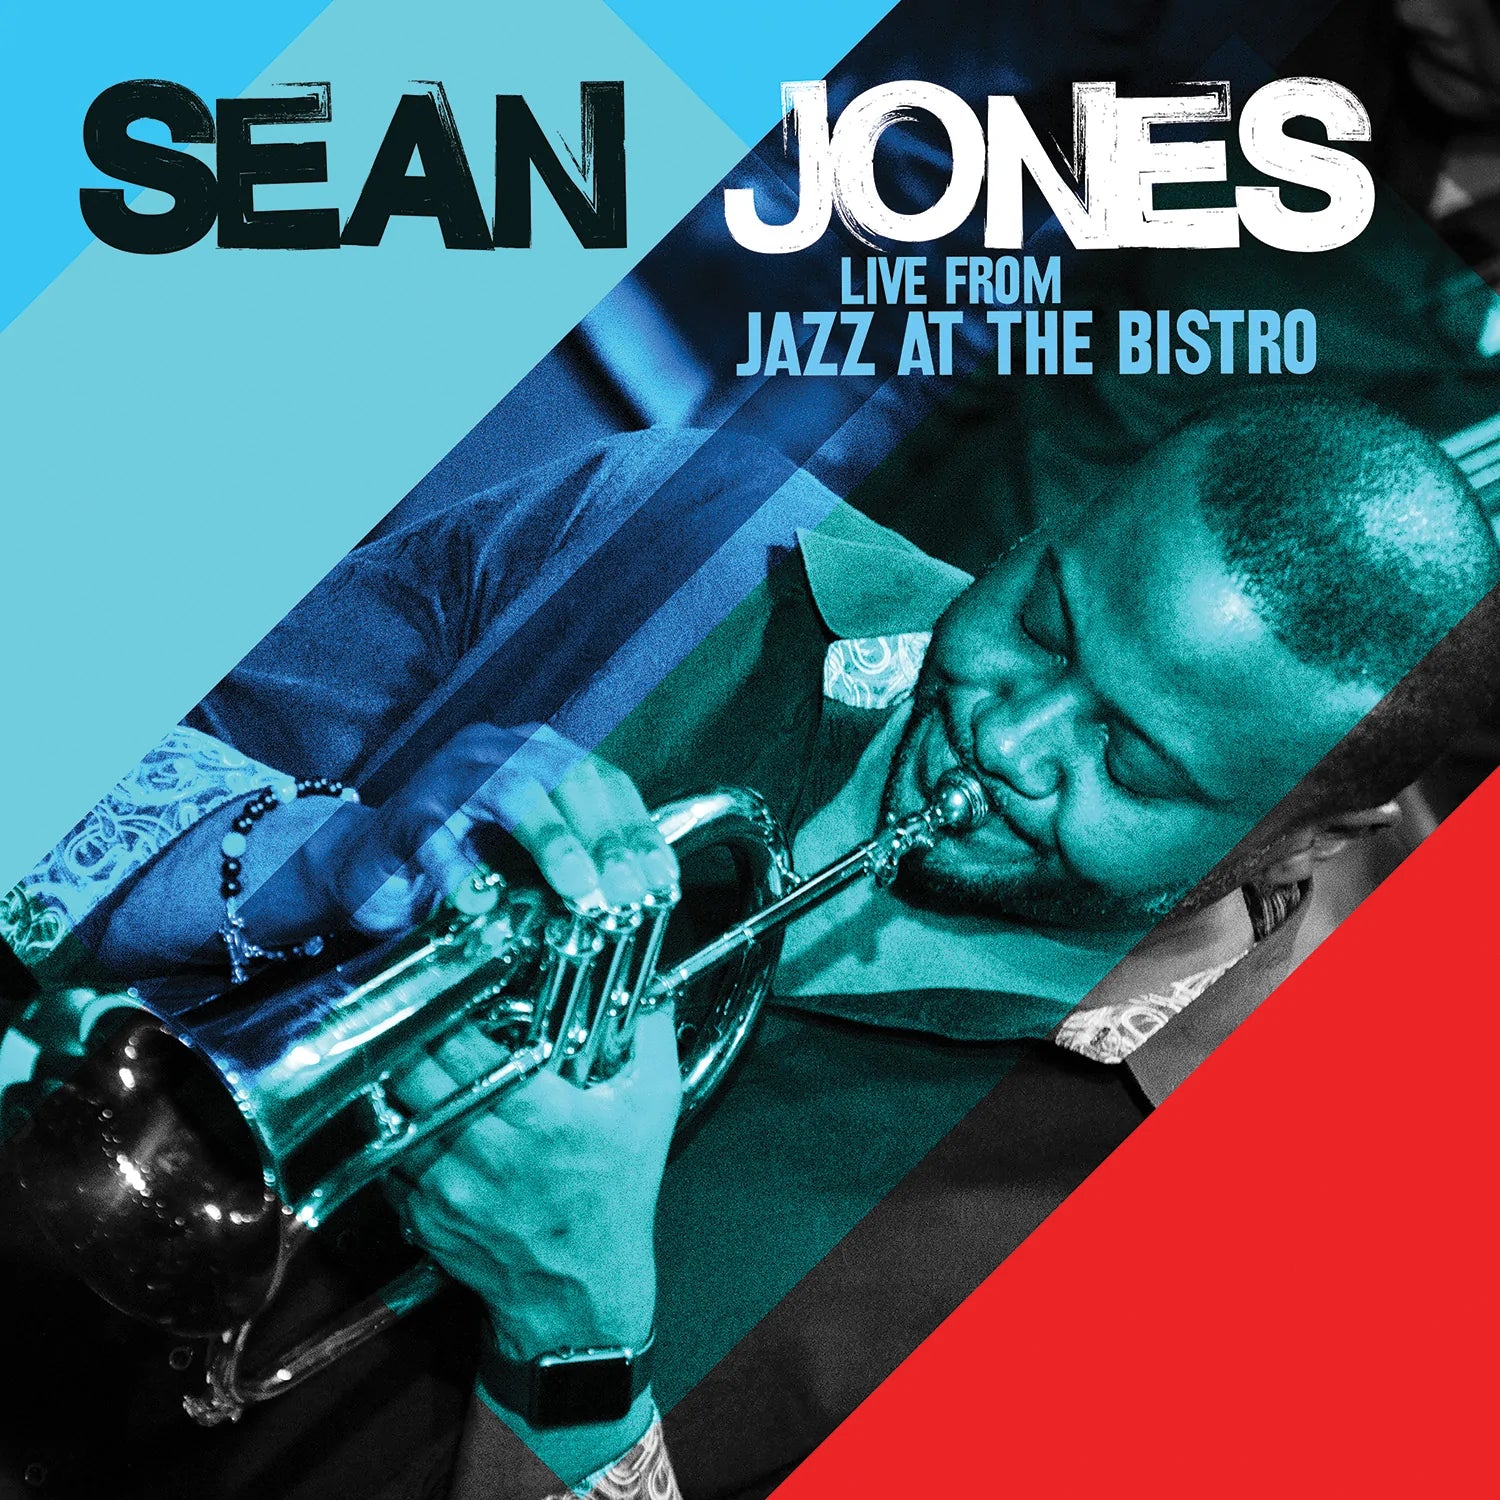 Sean Jones - Live from Jazz at the Bistro